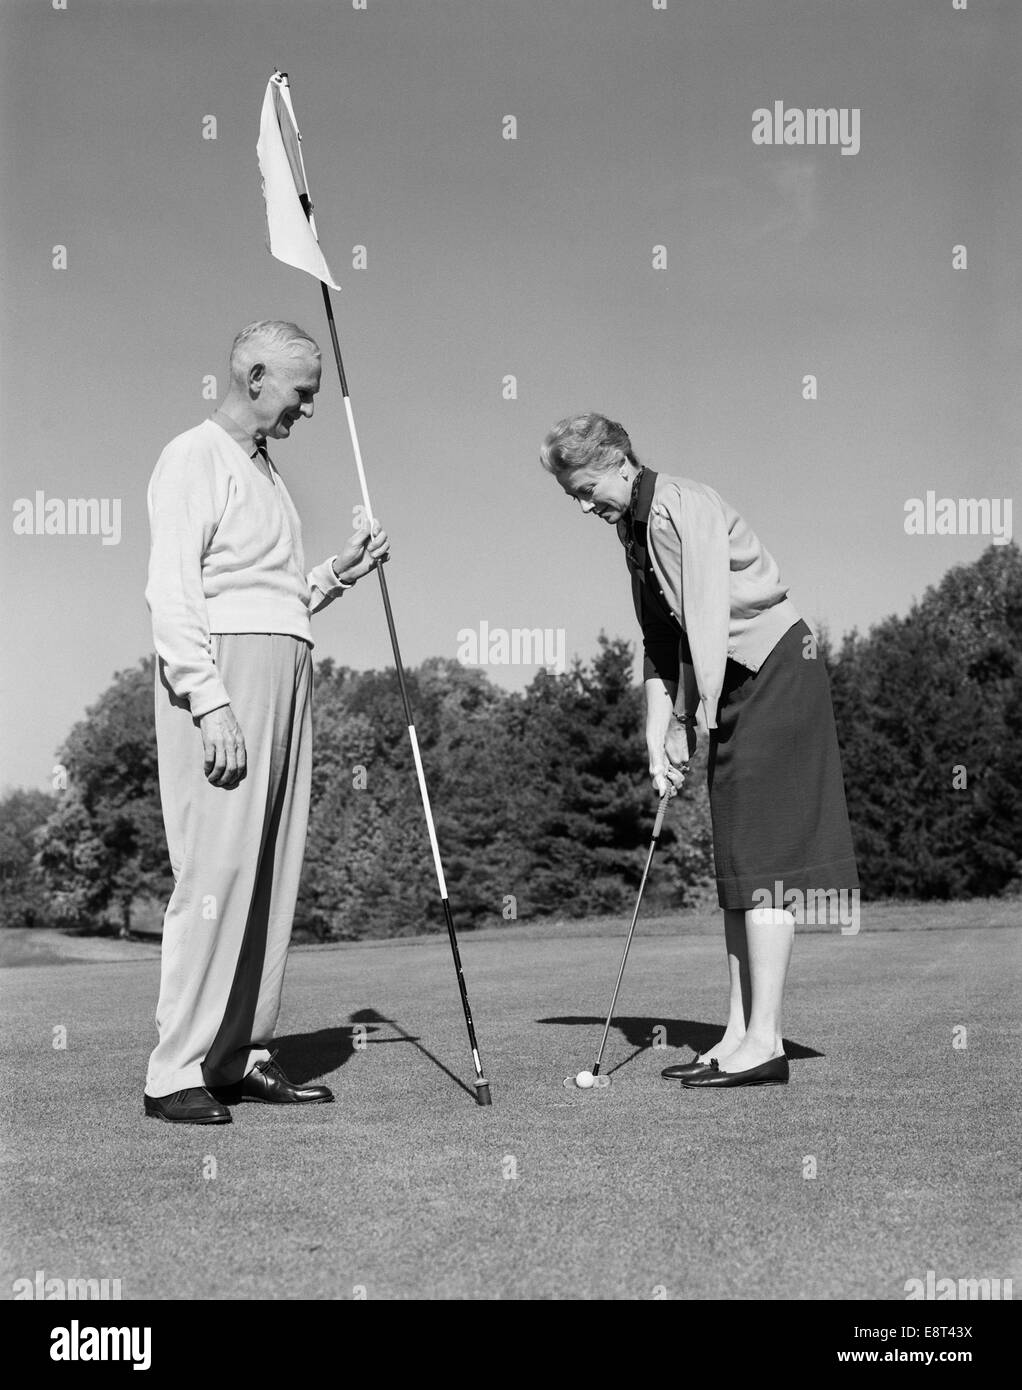 1960s ELDERLY WOMAN GETTING READY TO PUTT WHILE HUSBAND LOOKS ON HOLDING FLAG Stock Photo